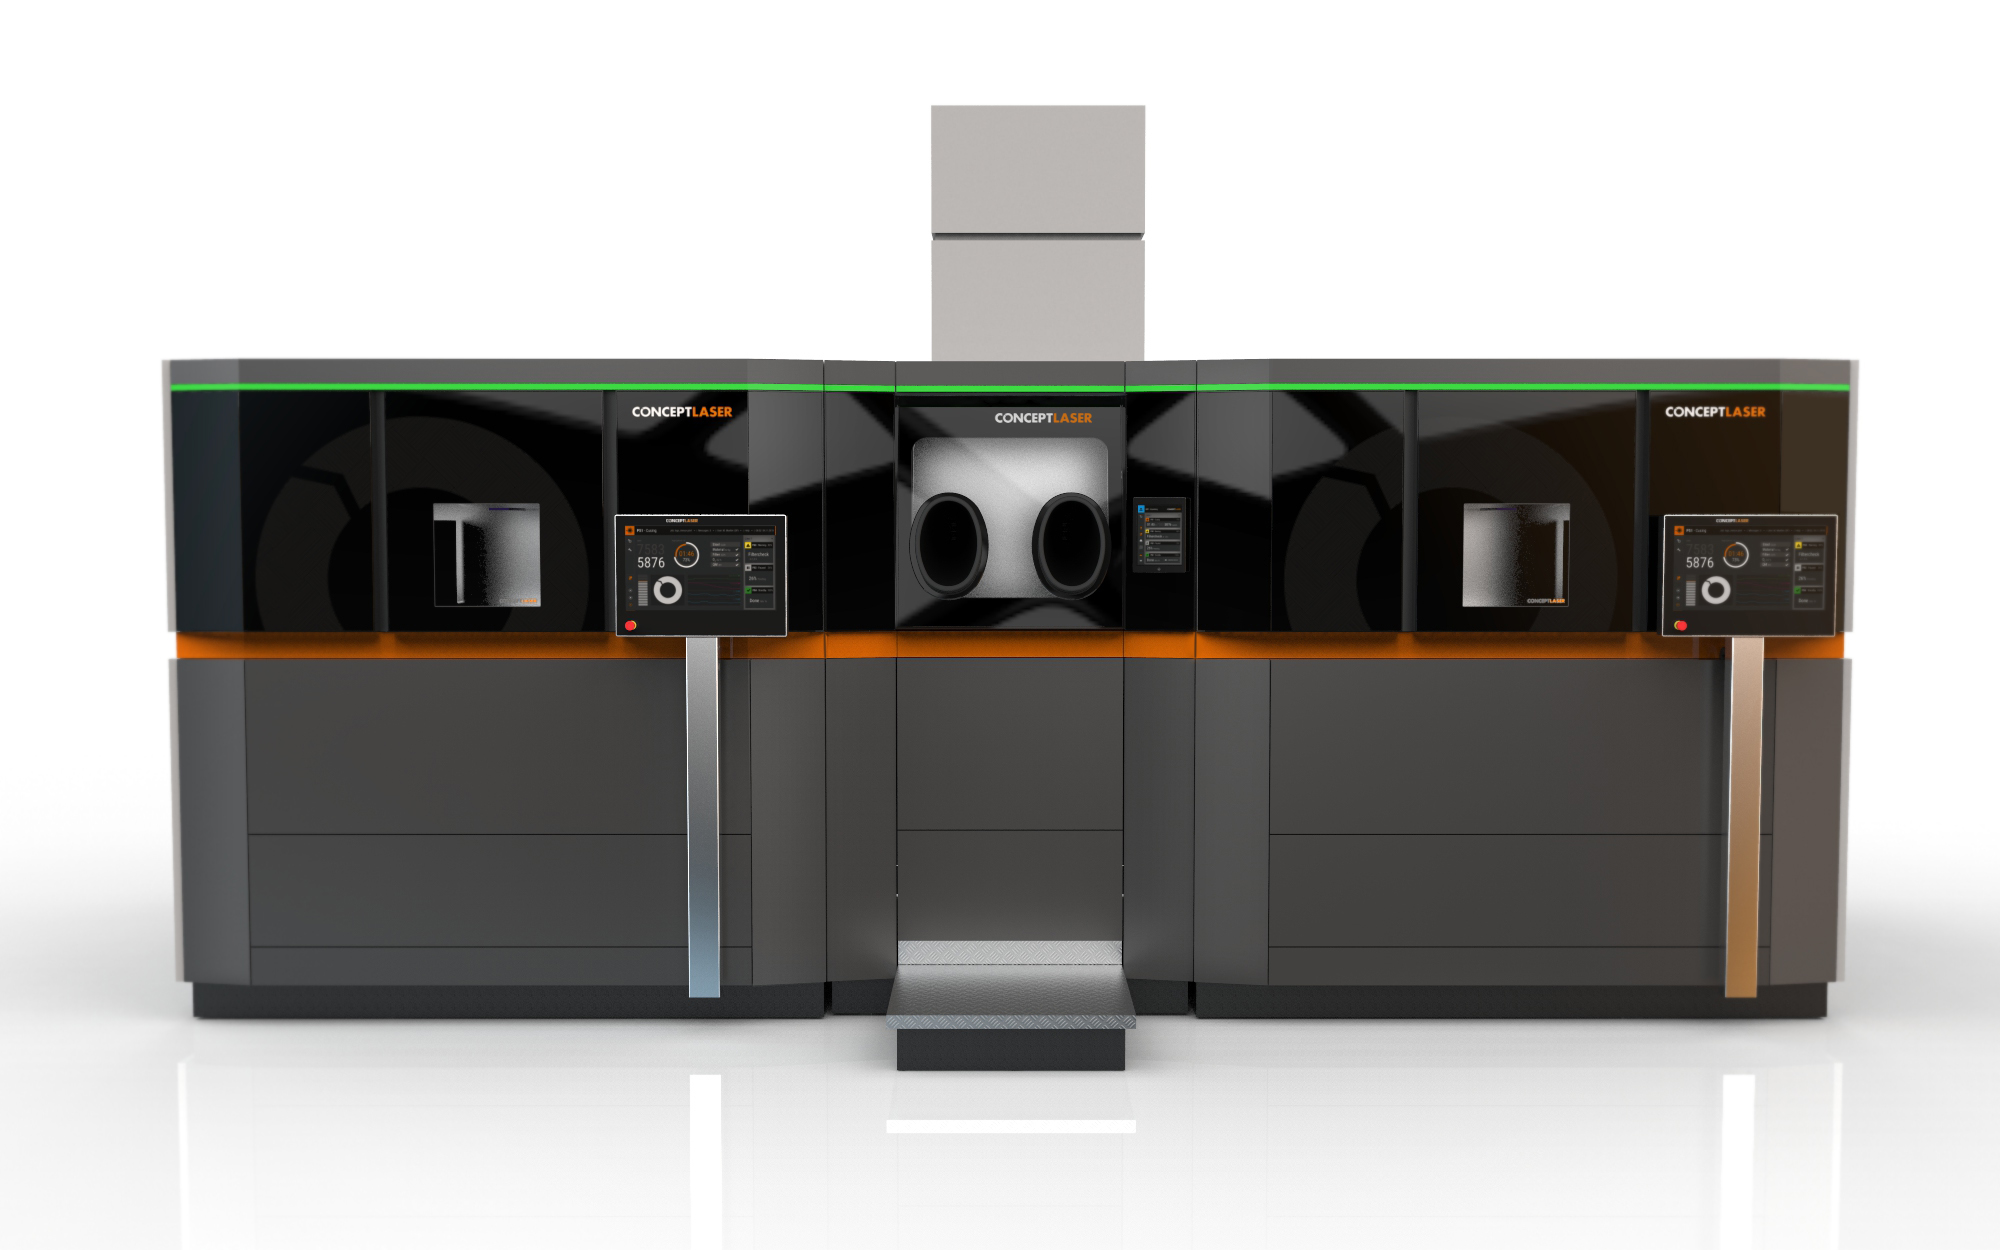 Option for combining a handling station with two process stations, Image: Concept Laser